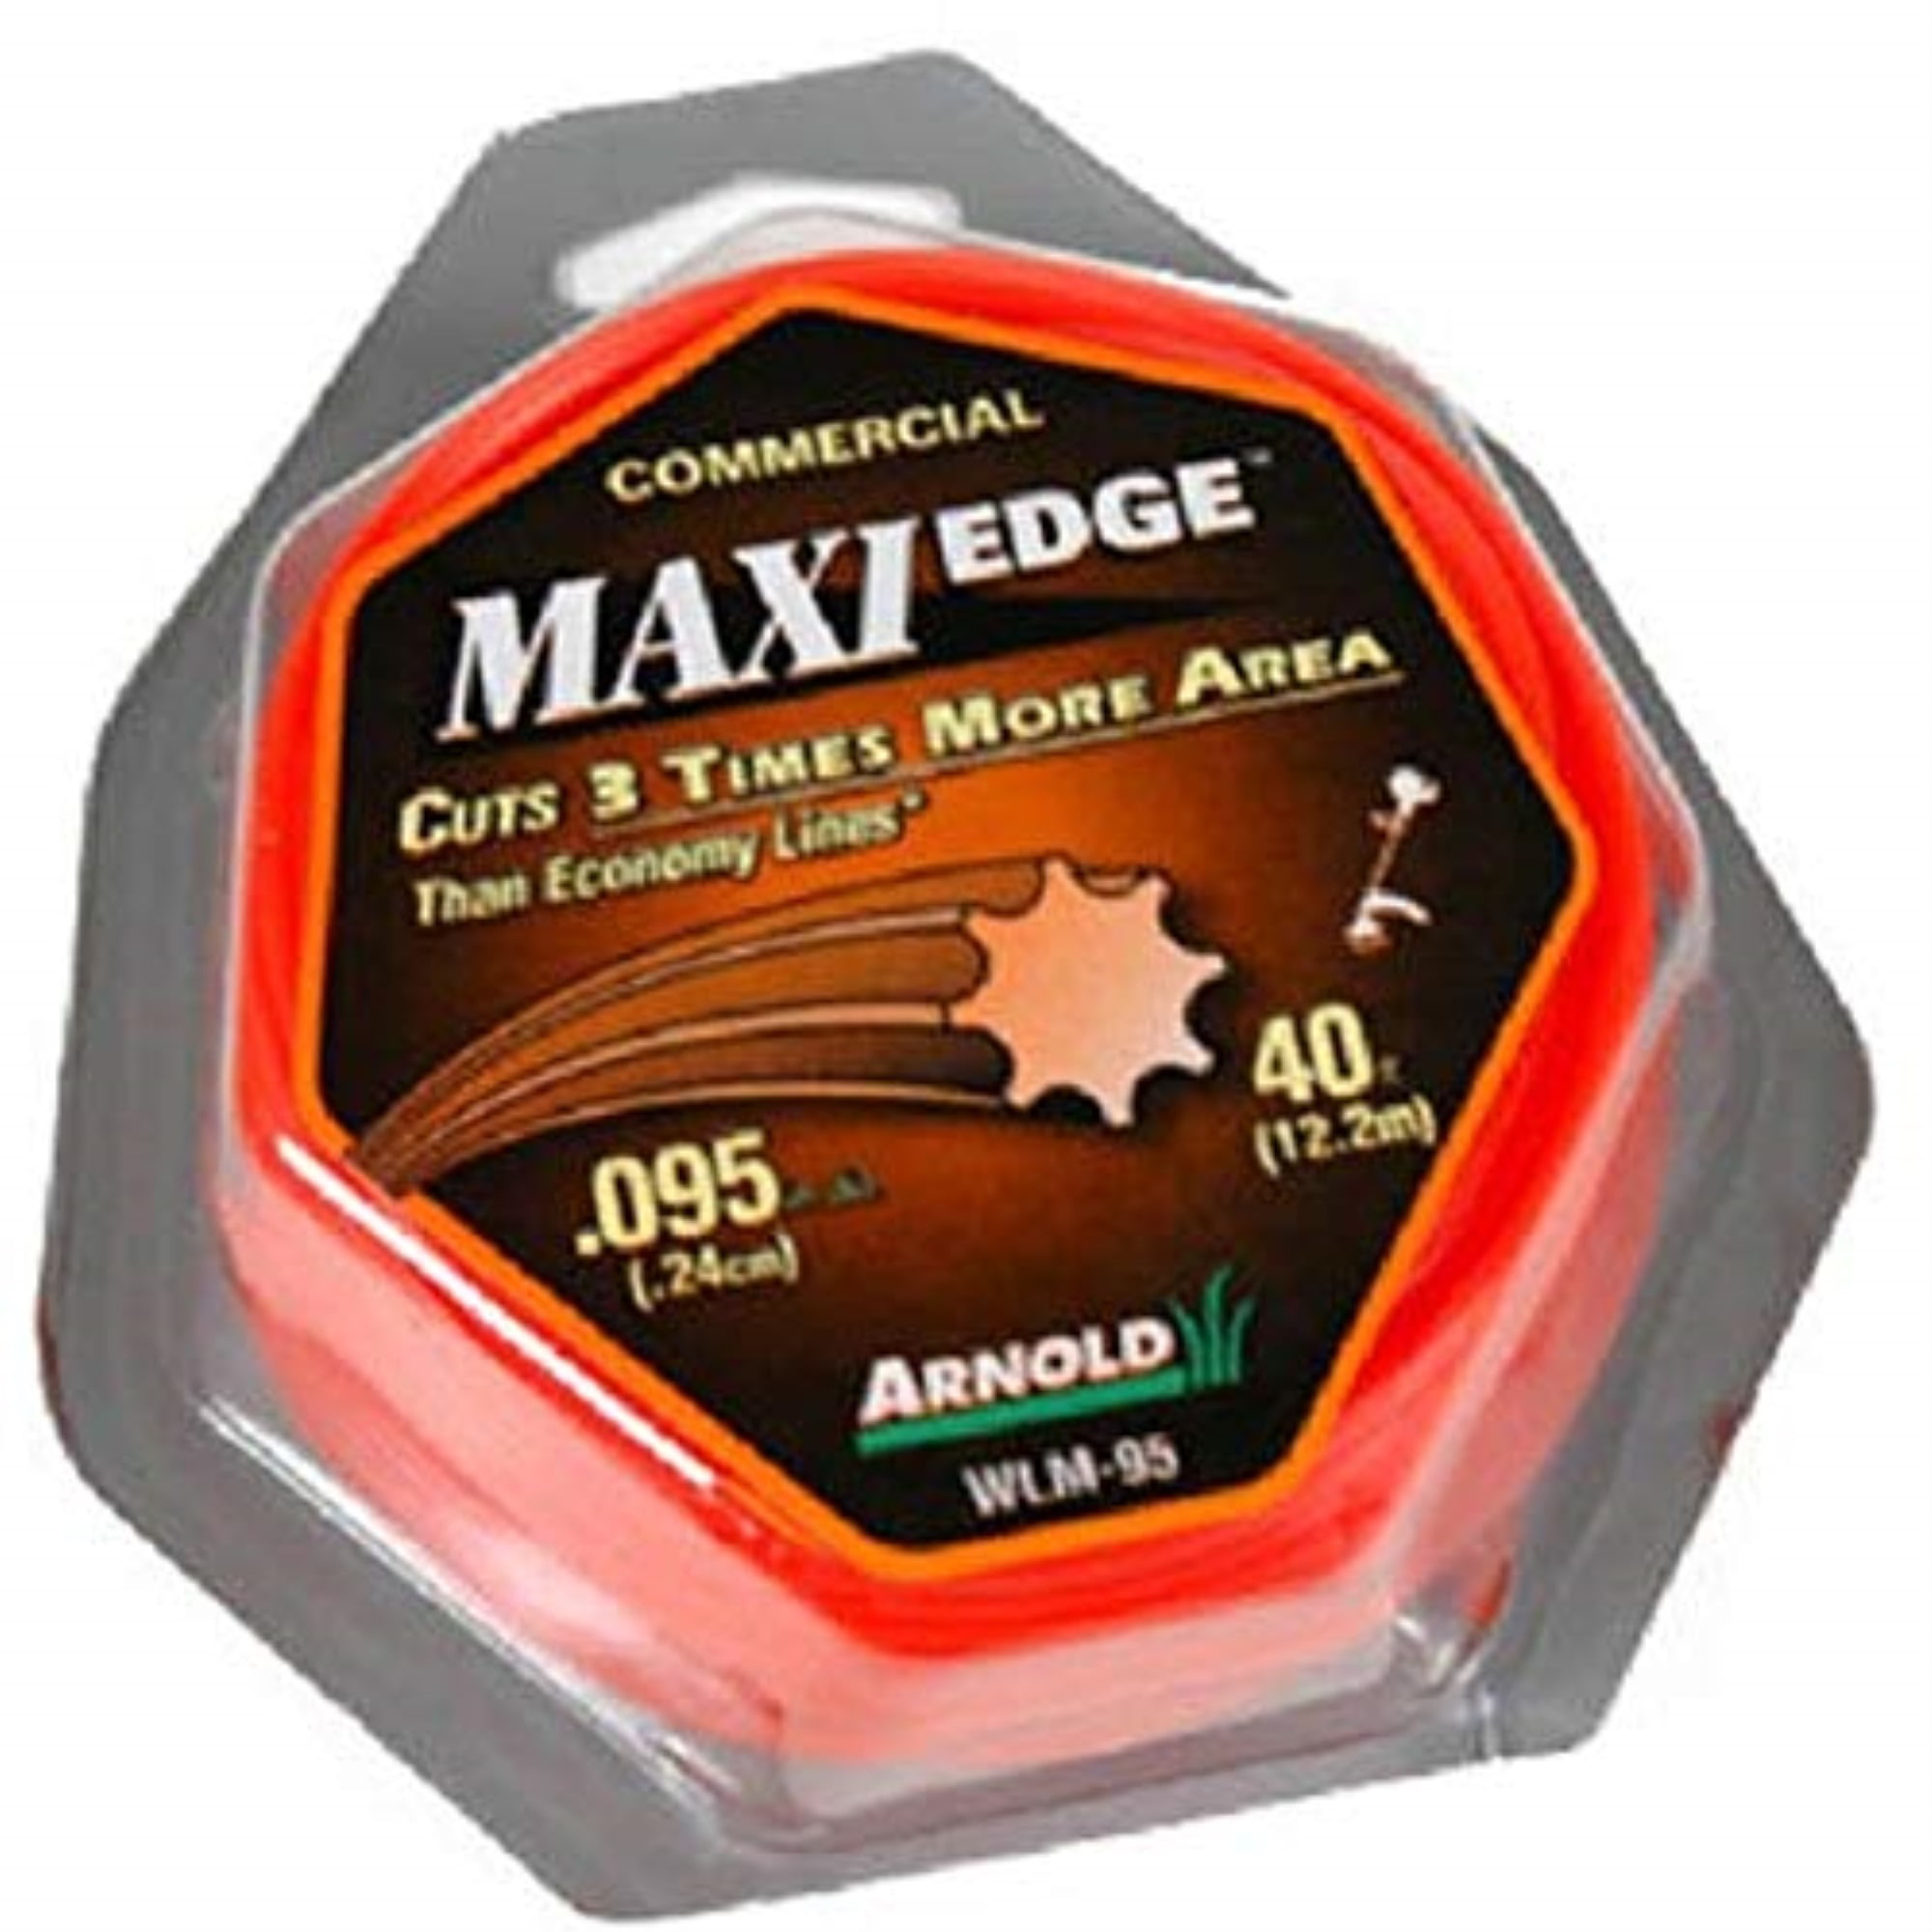 Arnold Maxi-Edge .095-Inch x 200-Foot Commercial Grade String Trimmer Line 